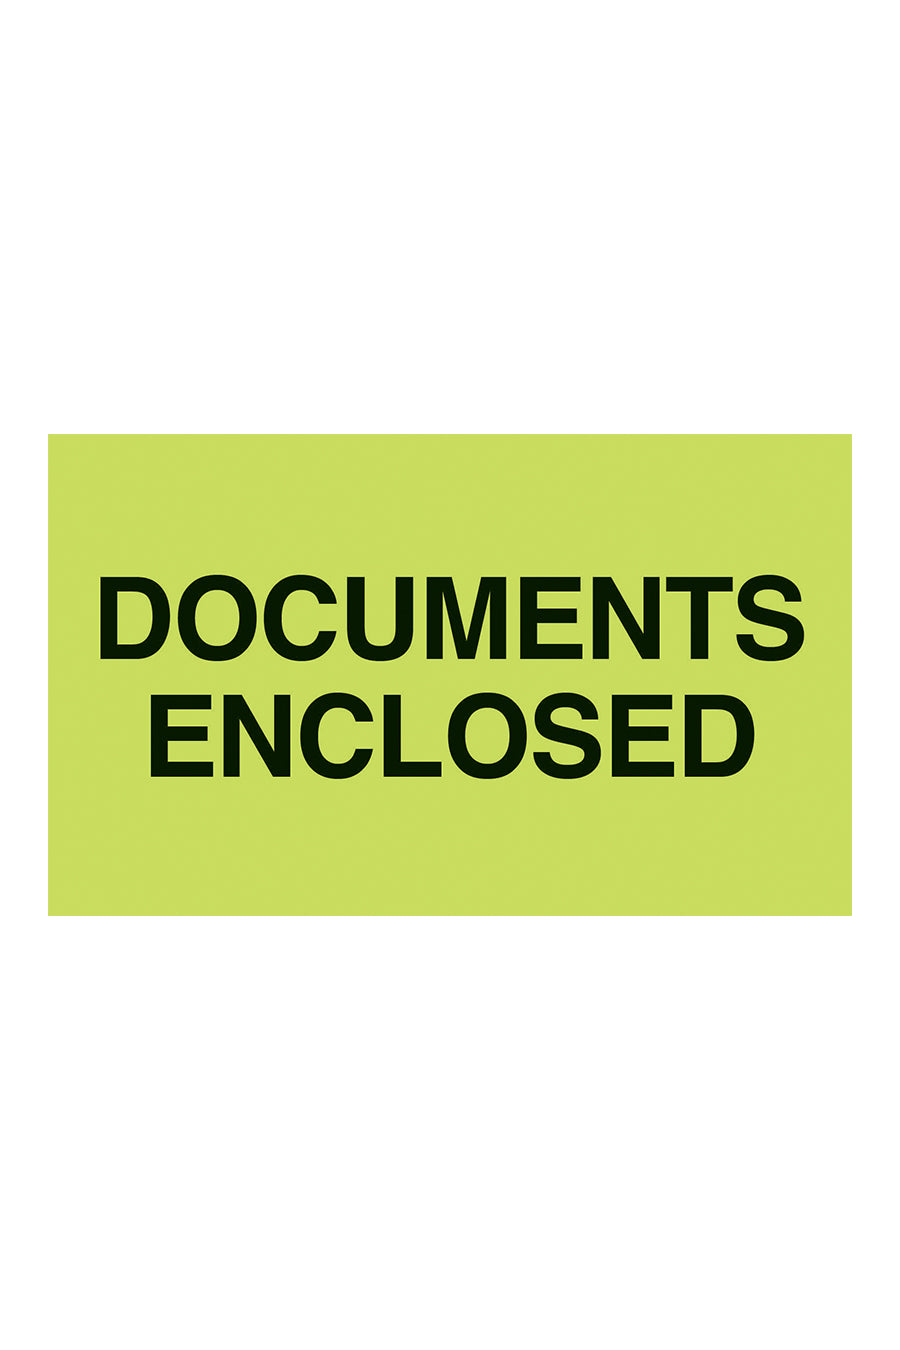 "Documents Enclosed", 3" x 5", Fluorescent Green, 500 Labels/Roll